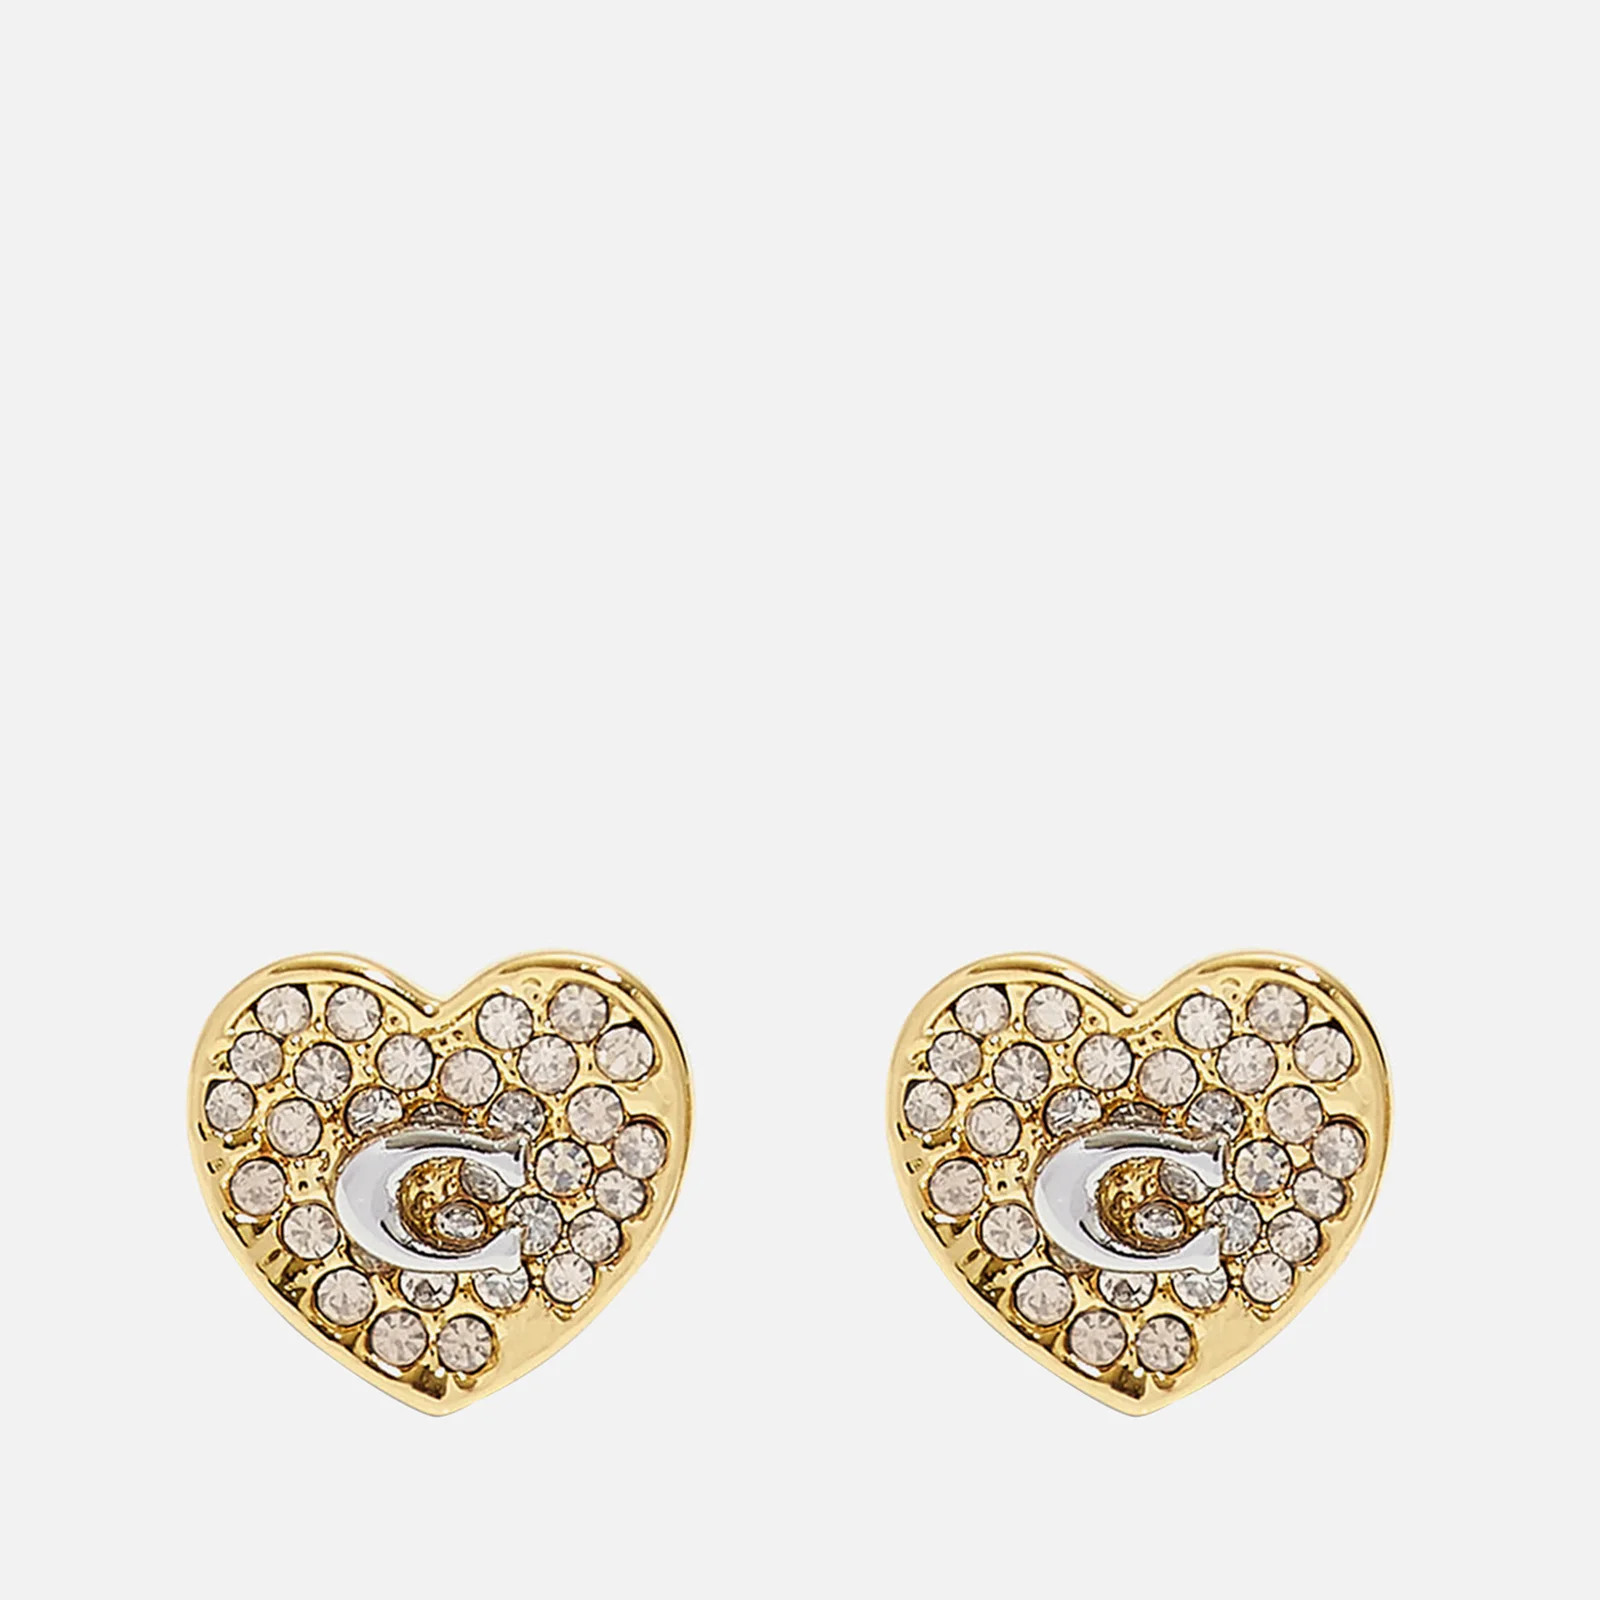 Coach C Heart Gold-Tone and Crystal Earrings Image 1